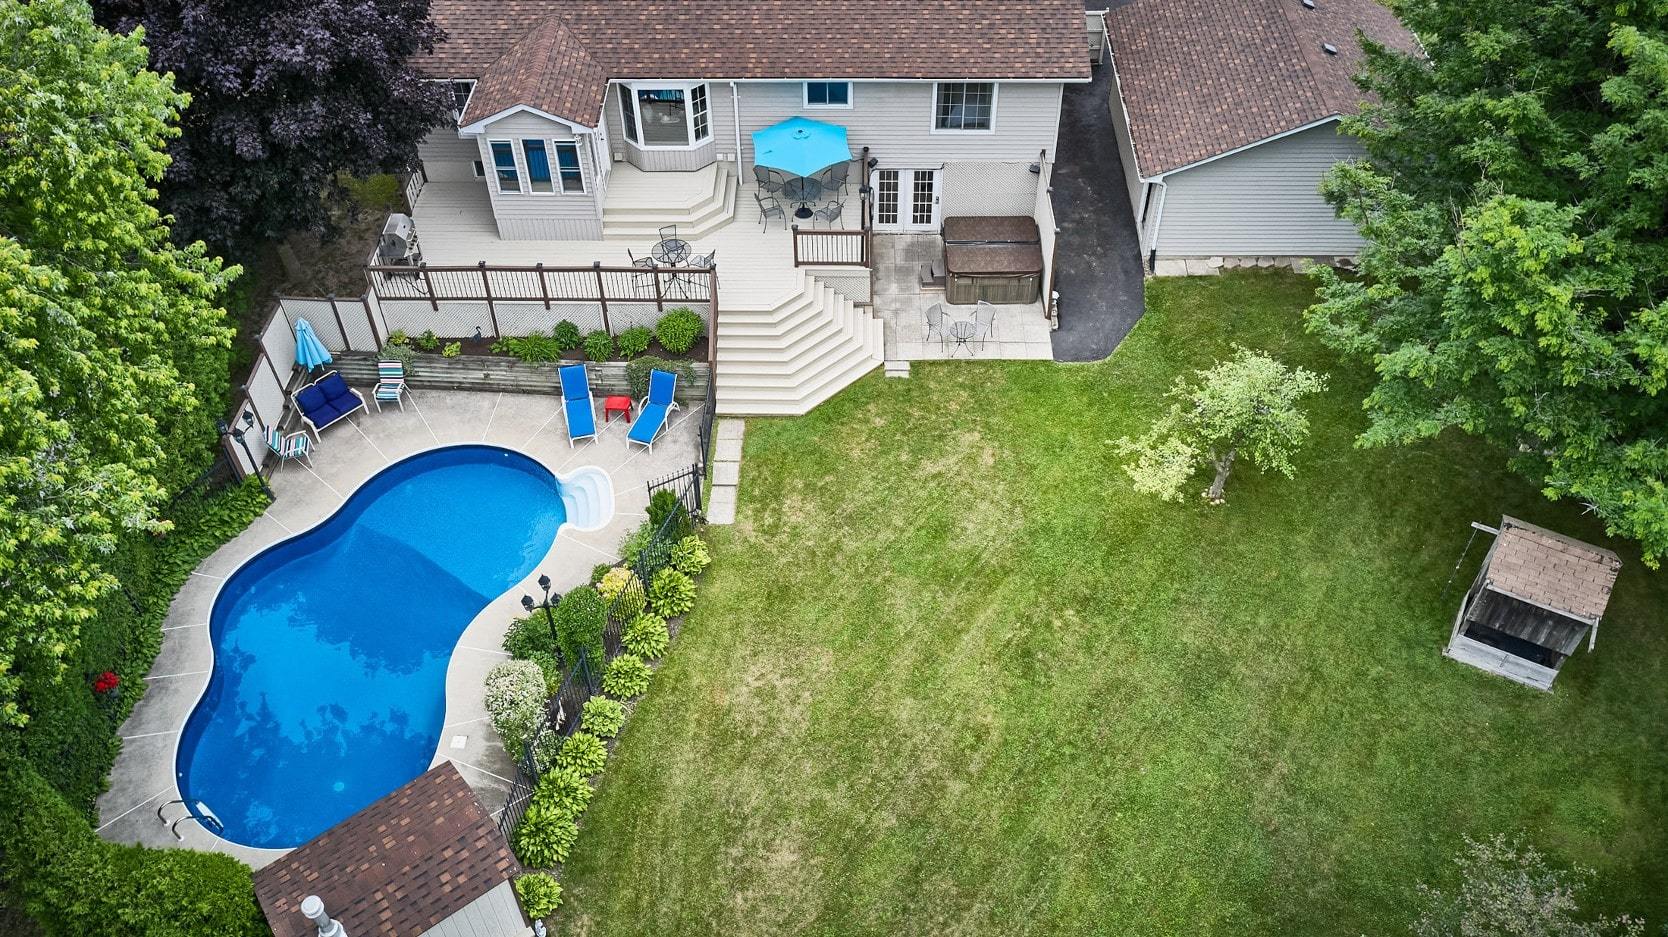 Home with a pool in Pickering, Ontario